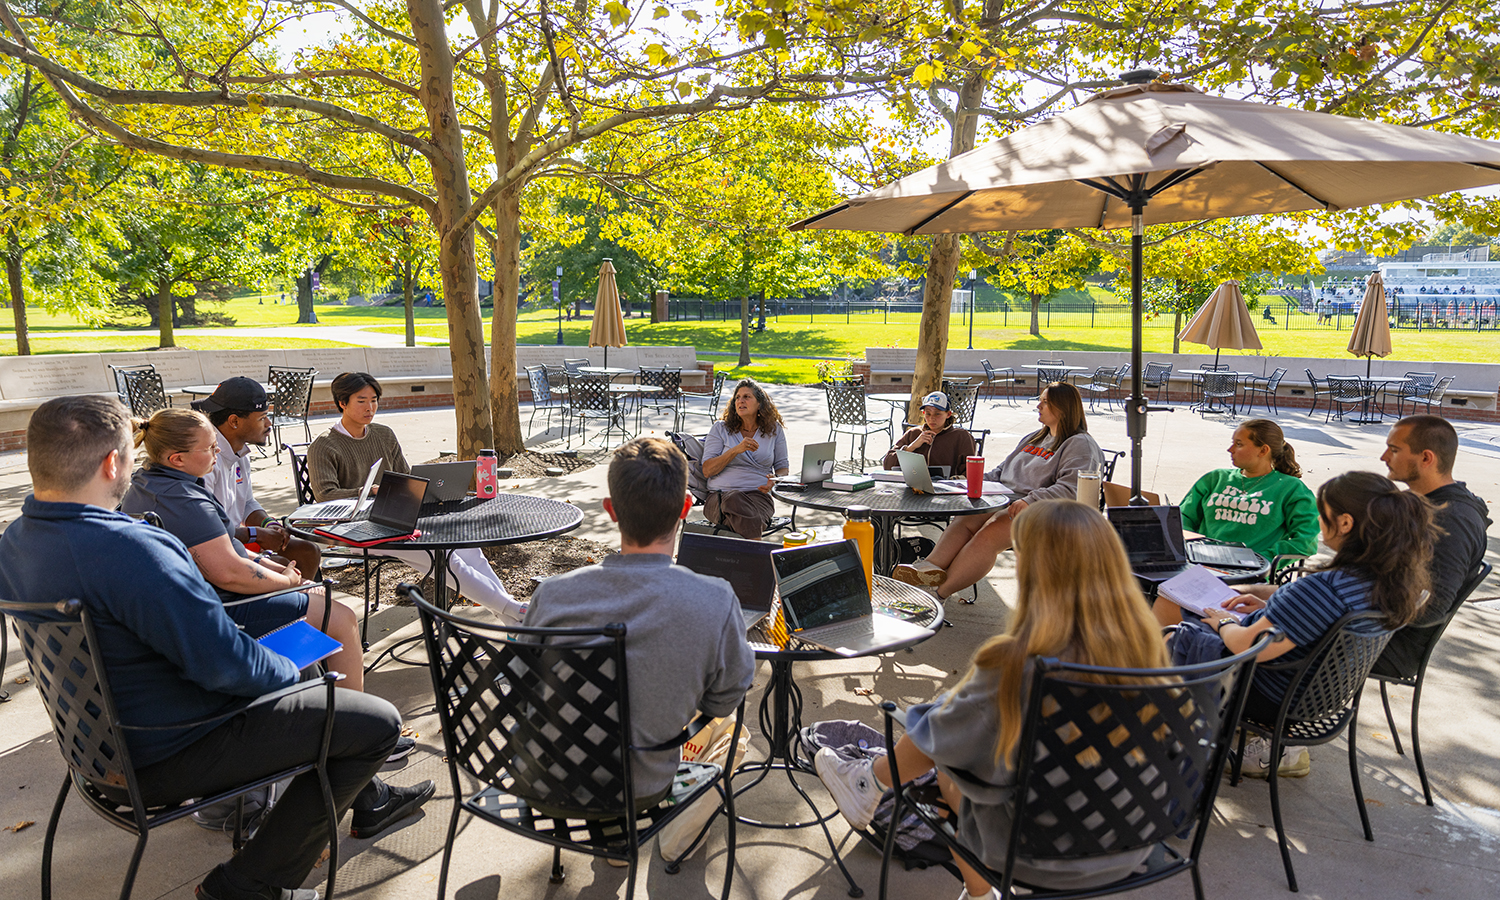 On the patio of the Scandling Campus Center, Associate Provost Susan Pliner leads a discussion in “History of Disability” for students in the Master’s of Higher Education Leadership program.